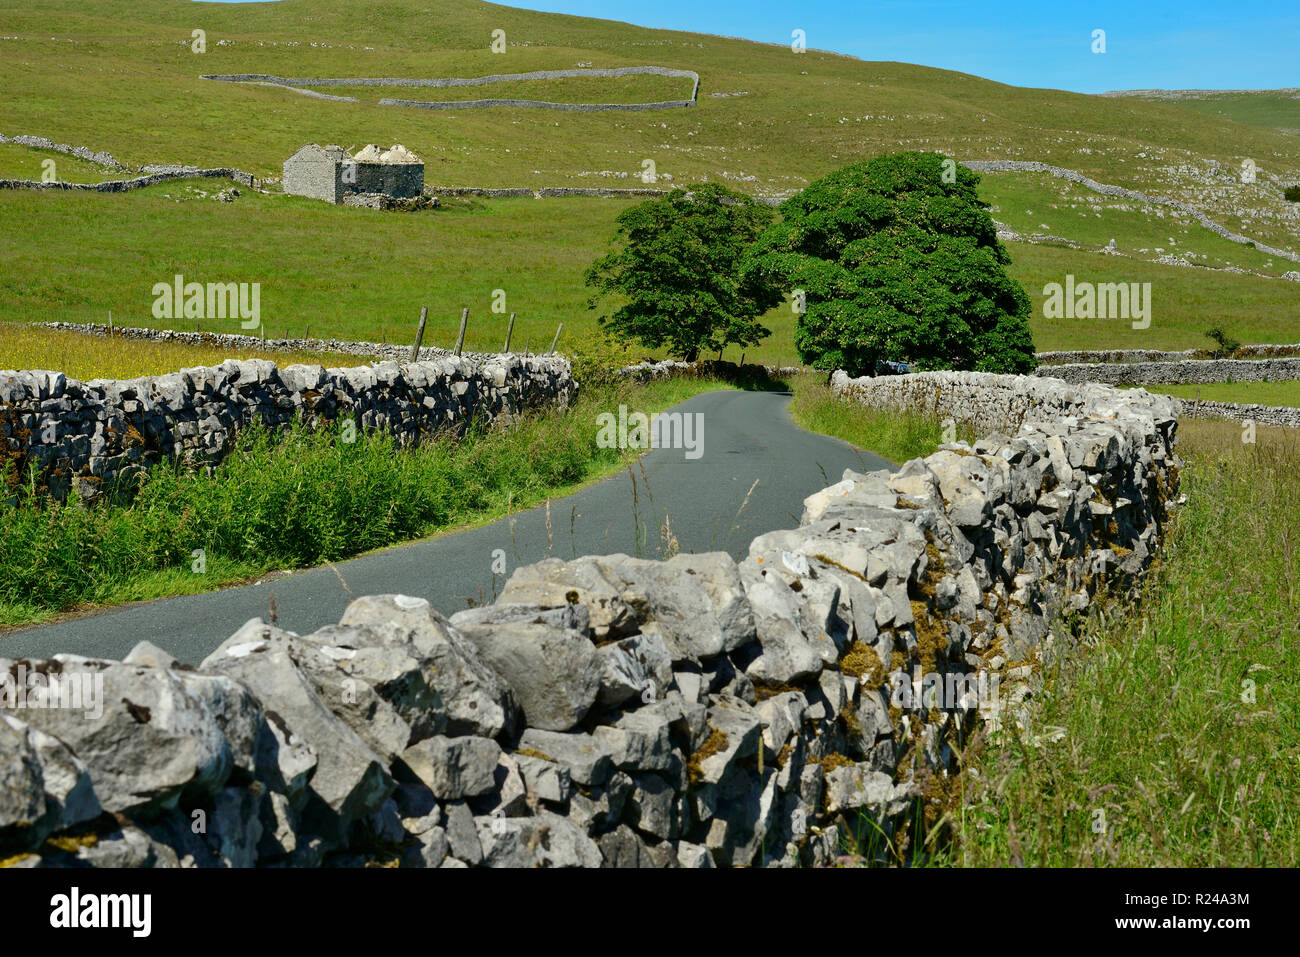 Stone walls lining country road, Ribblesdale Yorkshire Dales National Park, North Yorkshire, England, United Kingdom, Europe Stock Photo